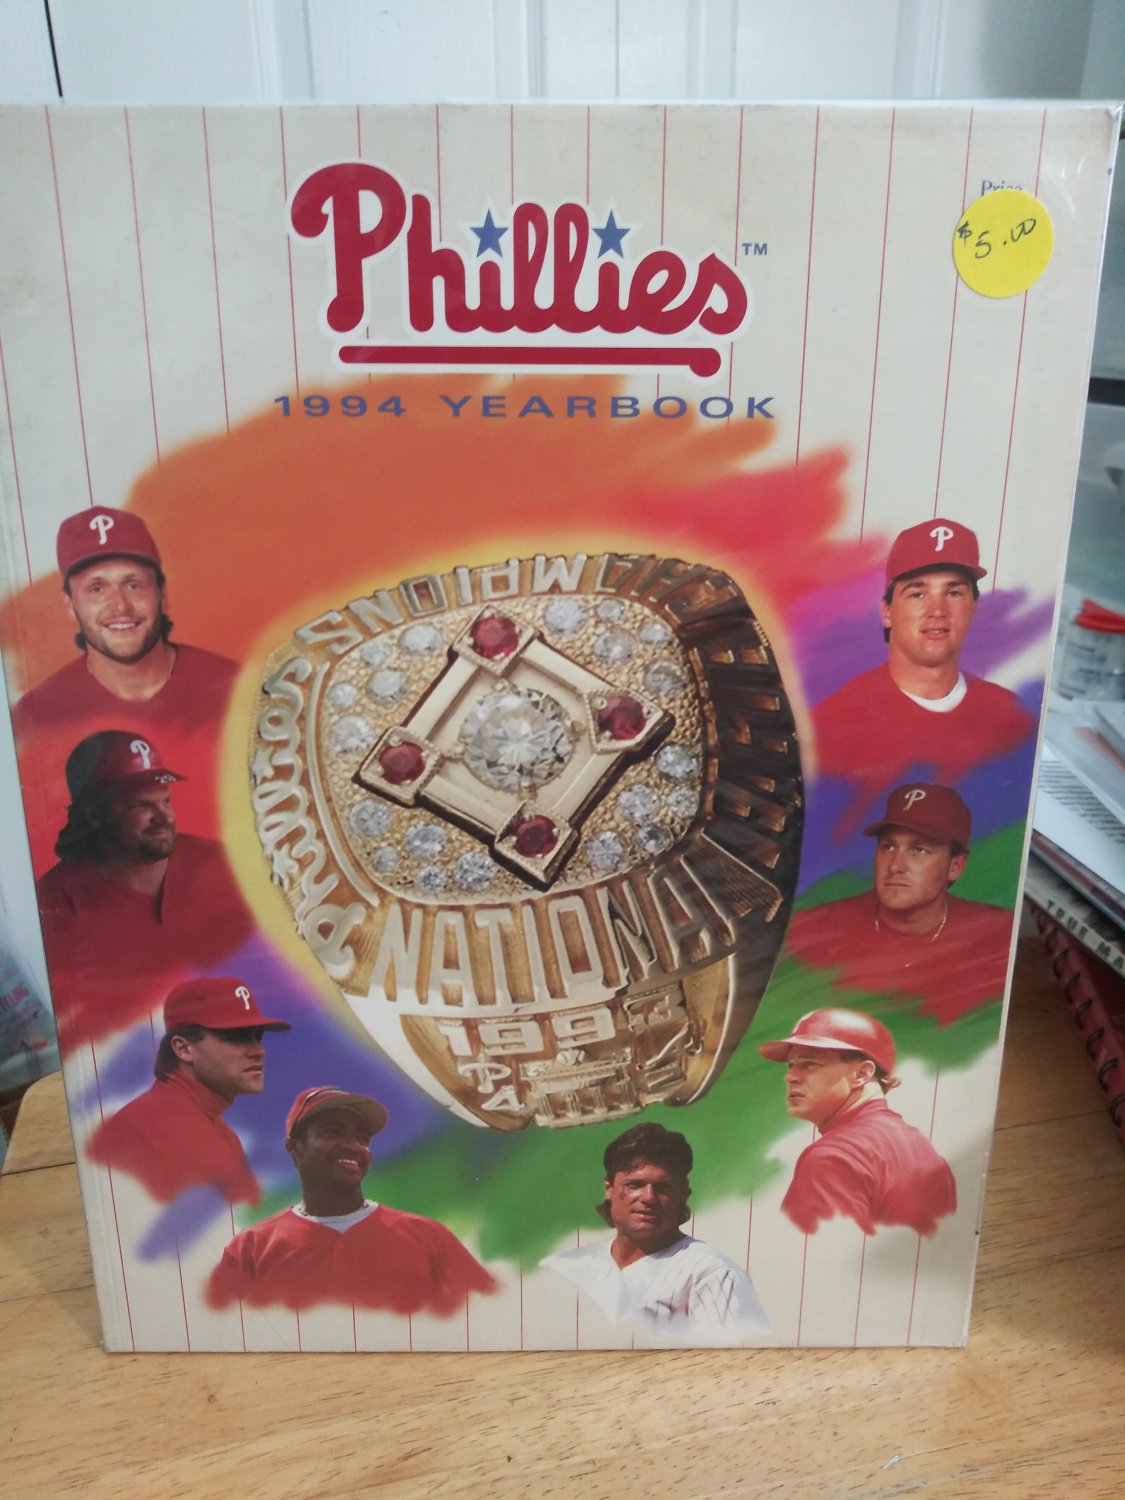 1994 PHILADELPHIA PHILLIES YEARBOOK WITH NATIONAL LEAGUE CHAMPIONS RING ON COVER